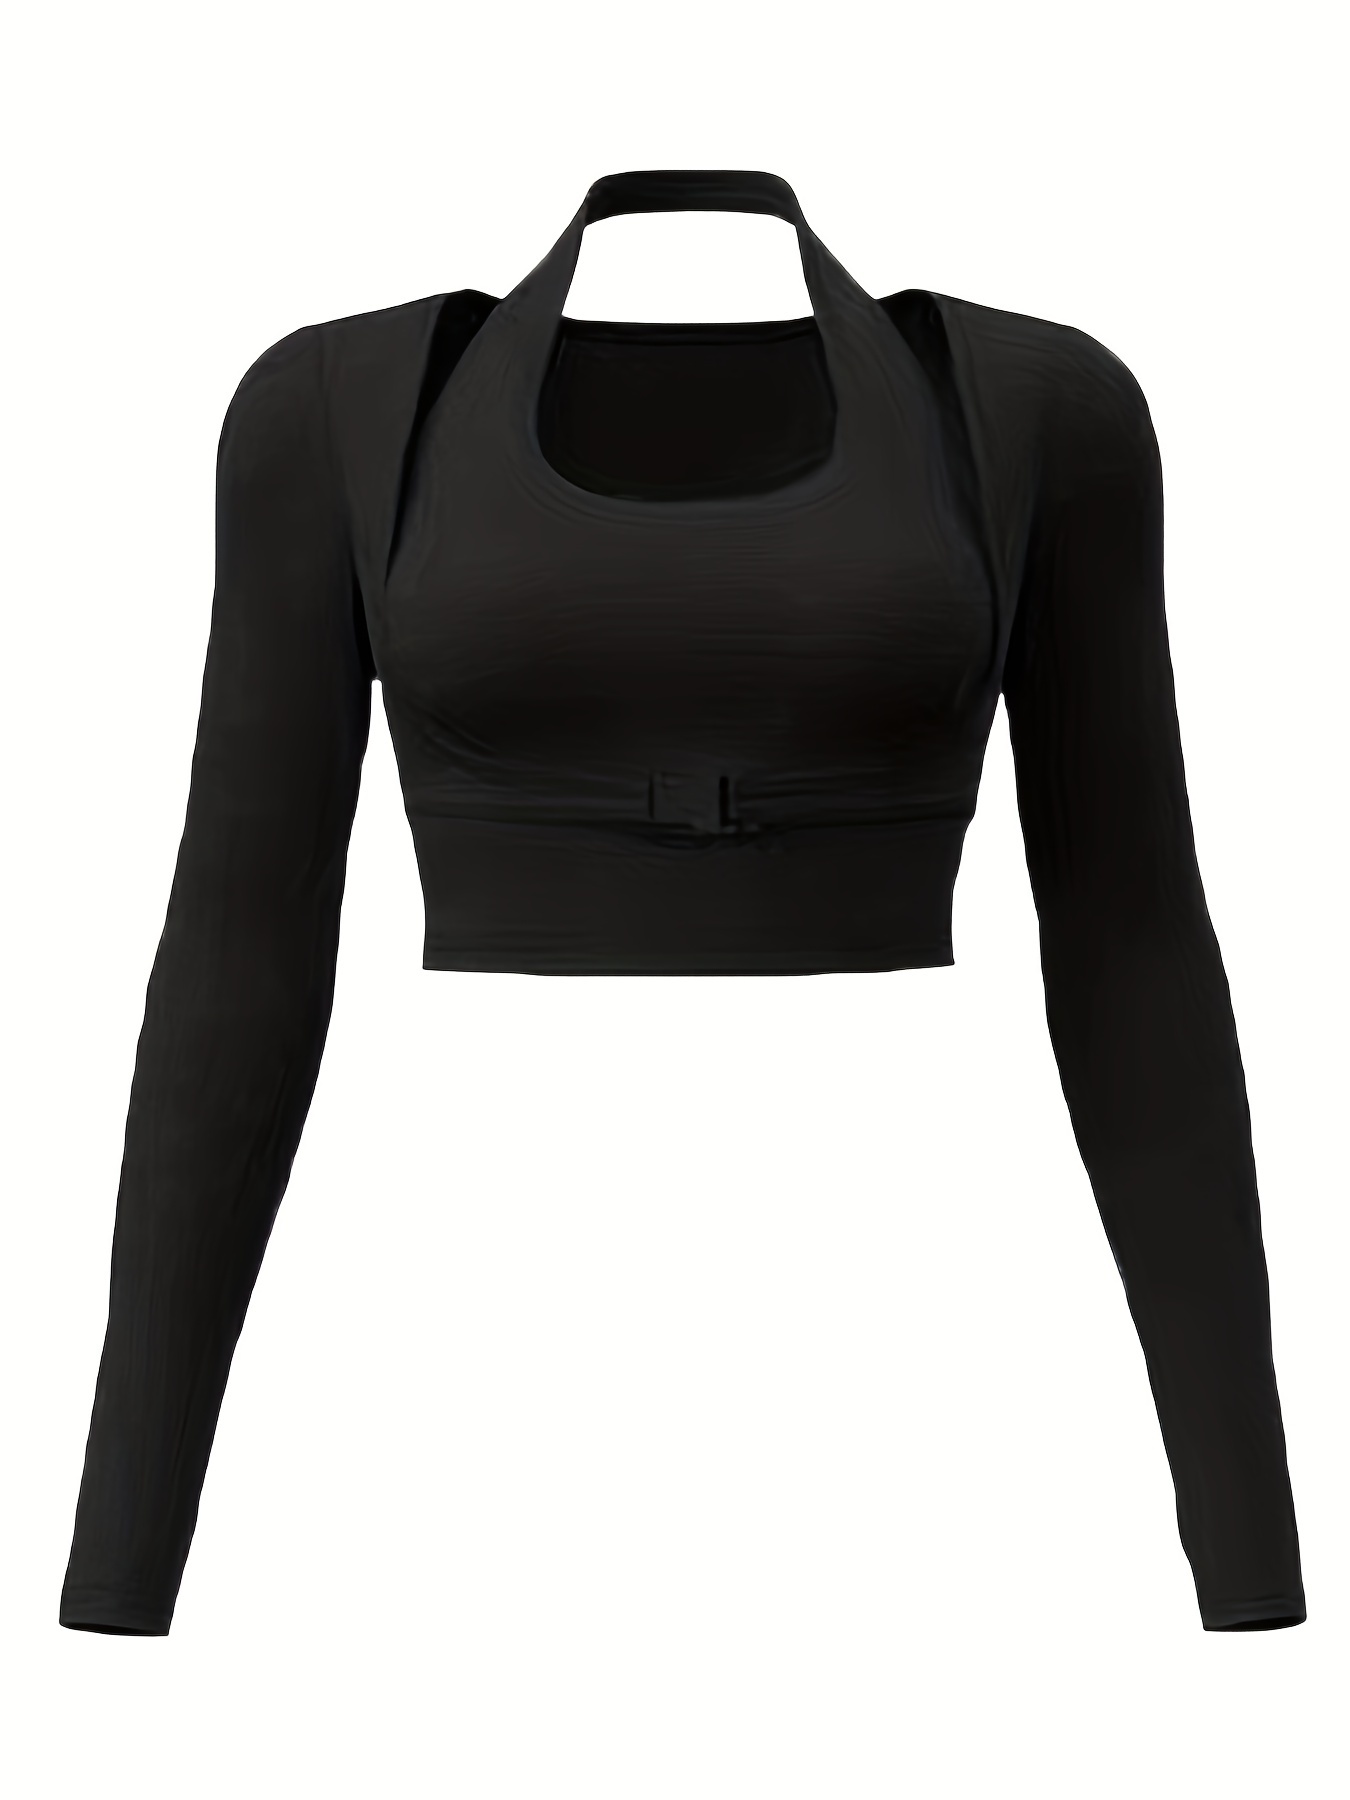 Womens Halter Tops with Built in Bra under 15 Women'S Long Sleeve Round Neck  Crop Top Tee Shirt Basic Solid Tight Slim Fit Cropped Shirt Workout Yoga  Workout Tops for Women Built